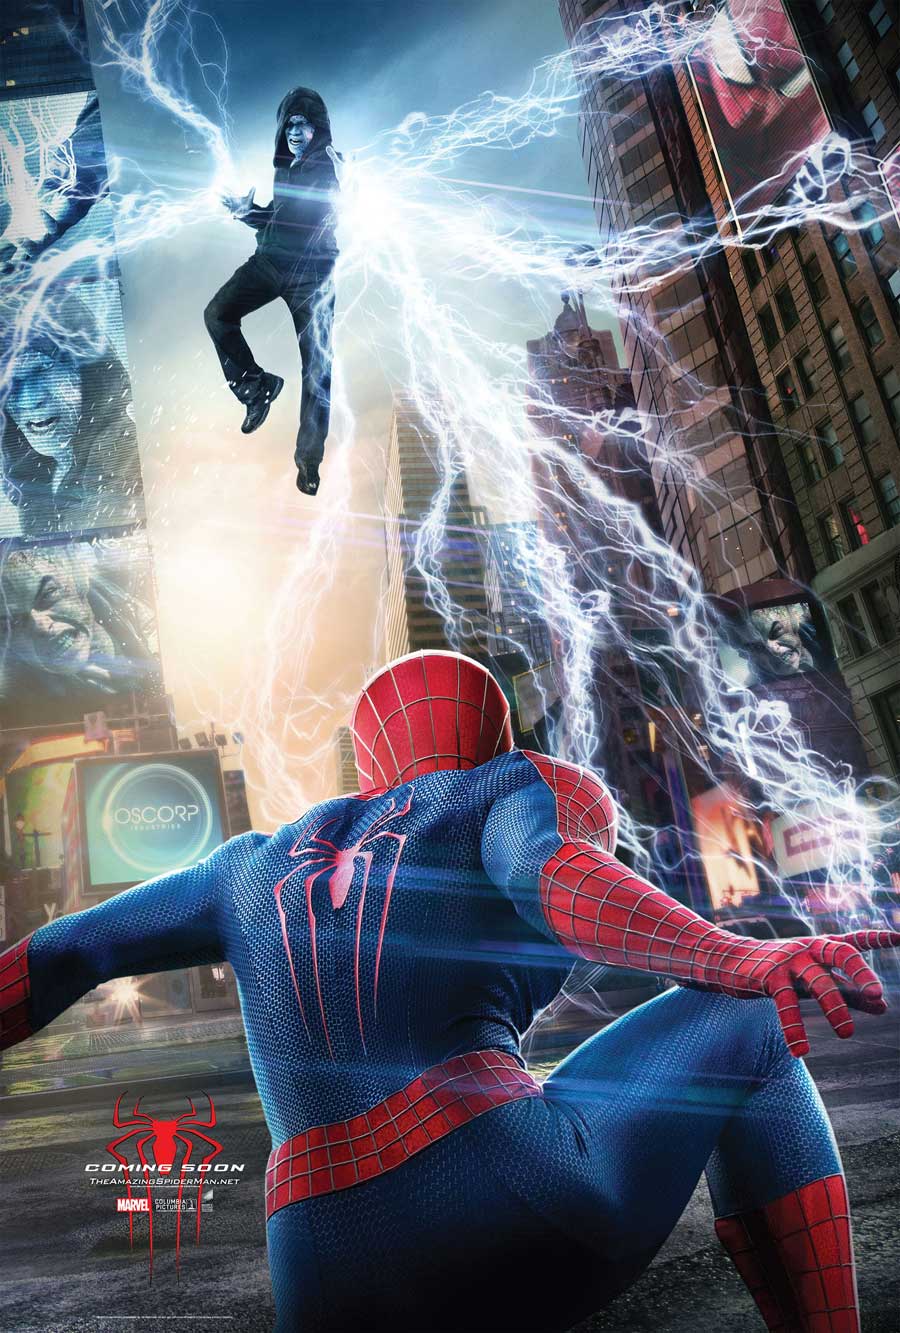 The Amazing Spider-man 2 Hq Wallpapers - Iphone The Amazing Spider Man 2 - HD Wallpaper 